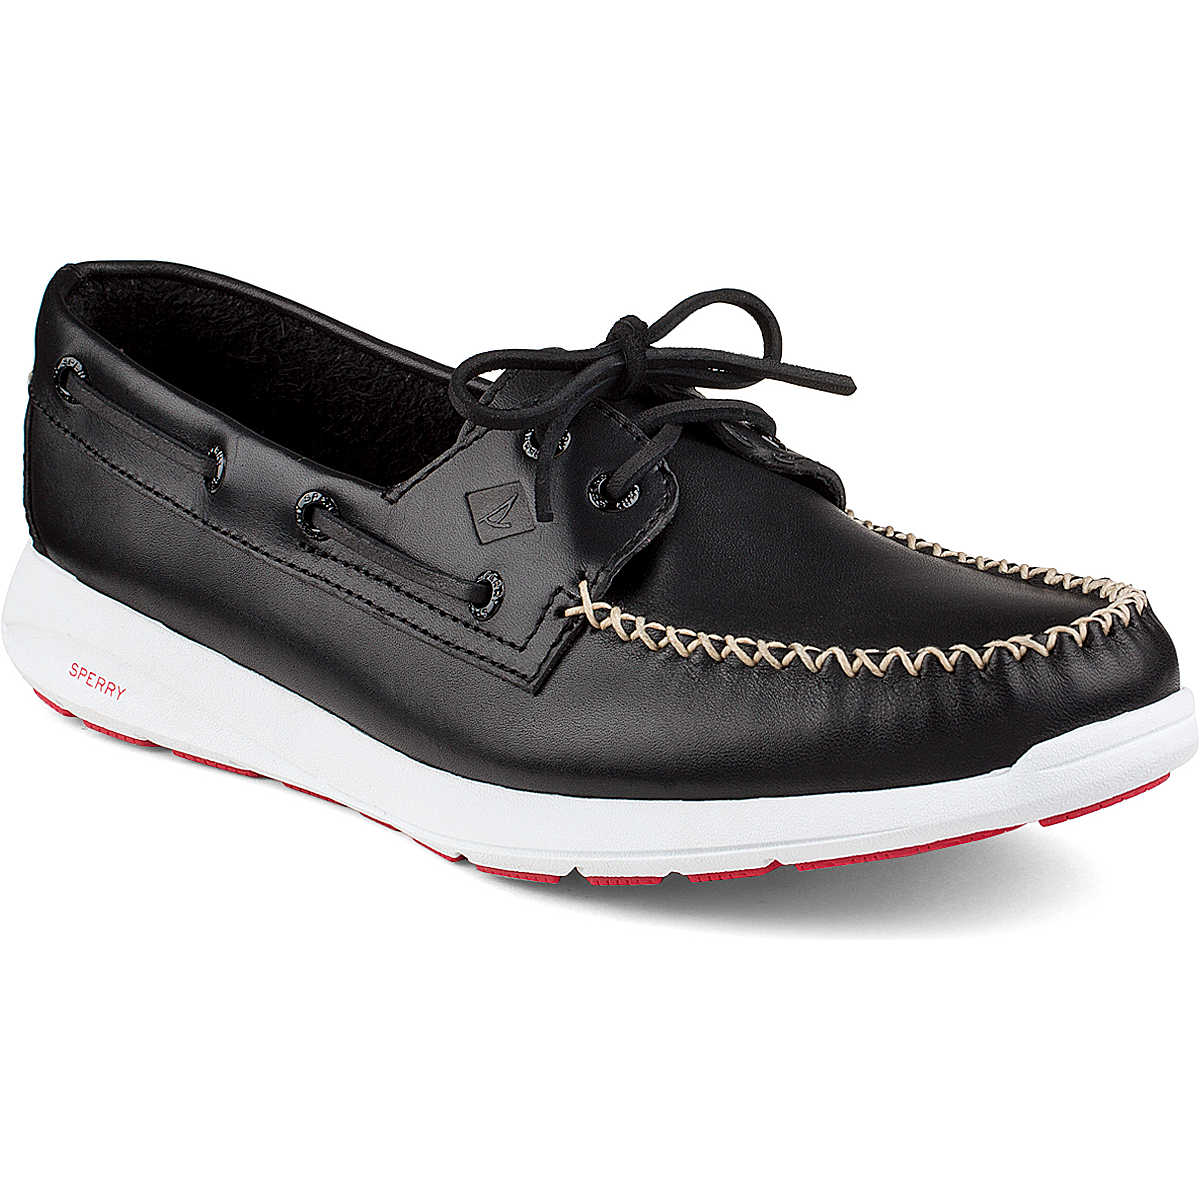 Paul Sperry Sojourn Leather Shoe, Black, dynamic 1